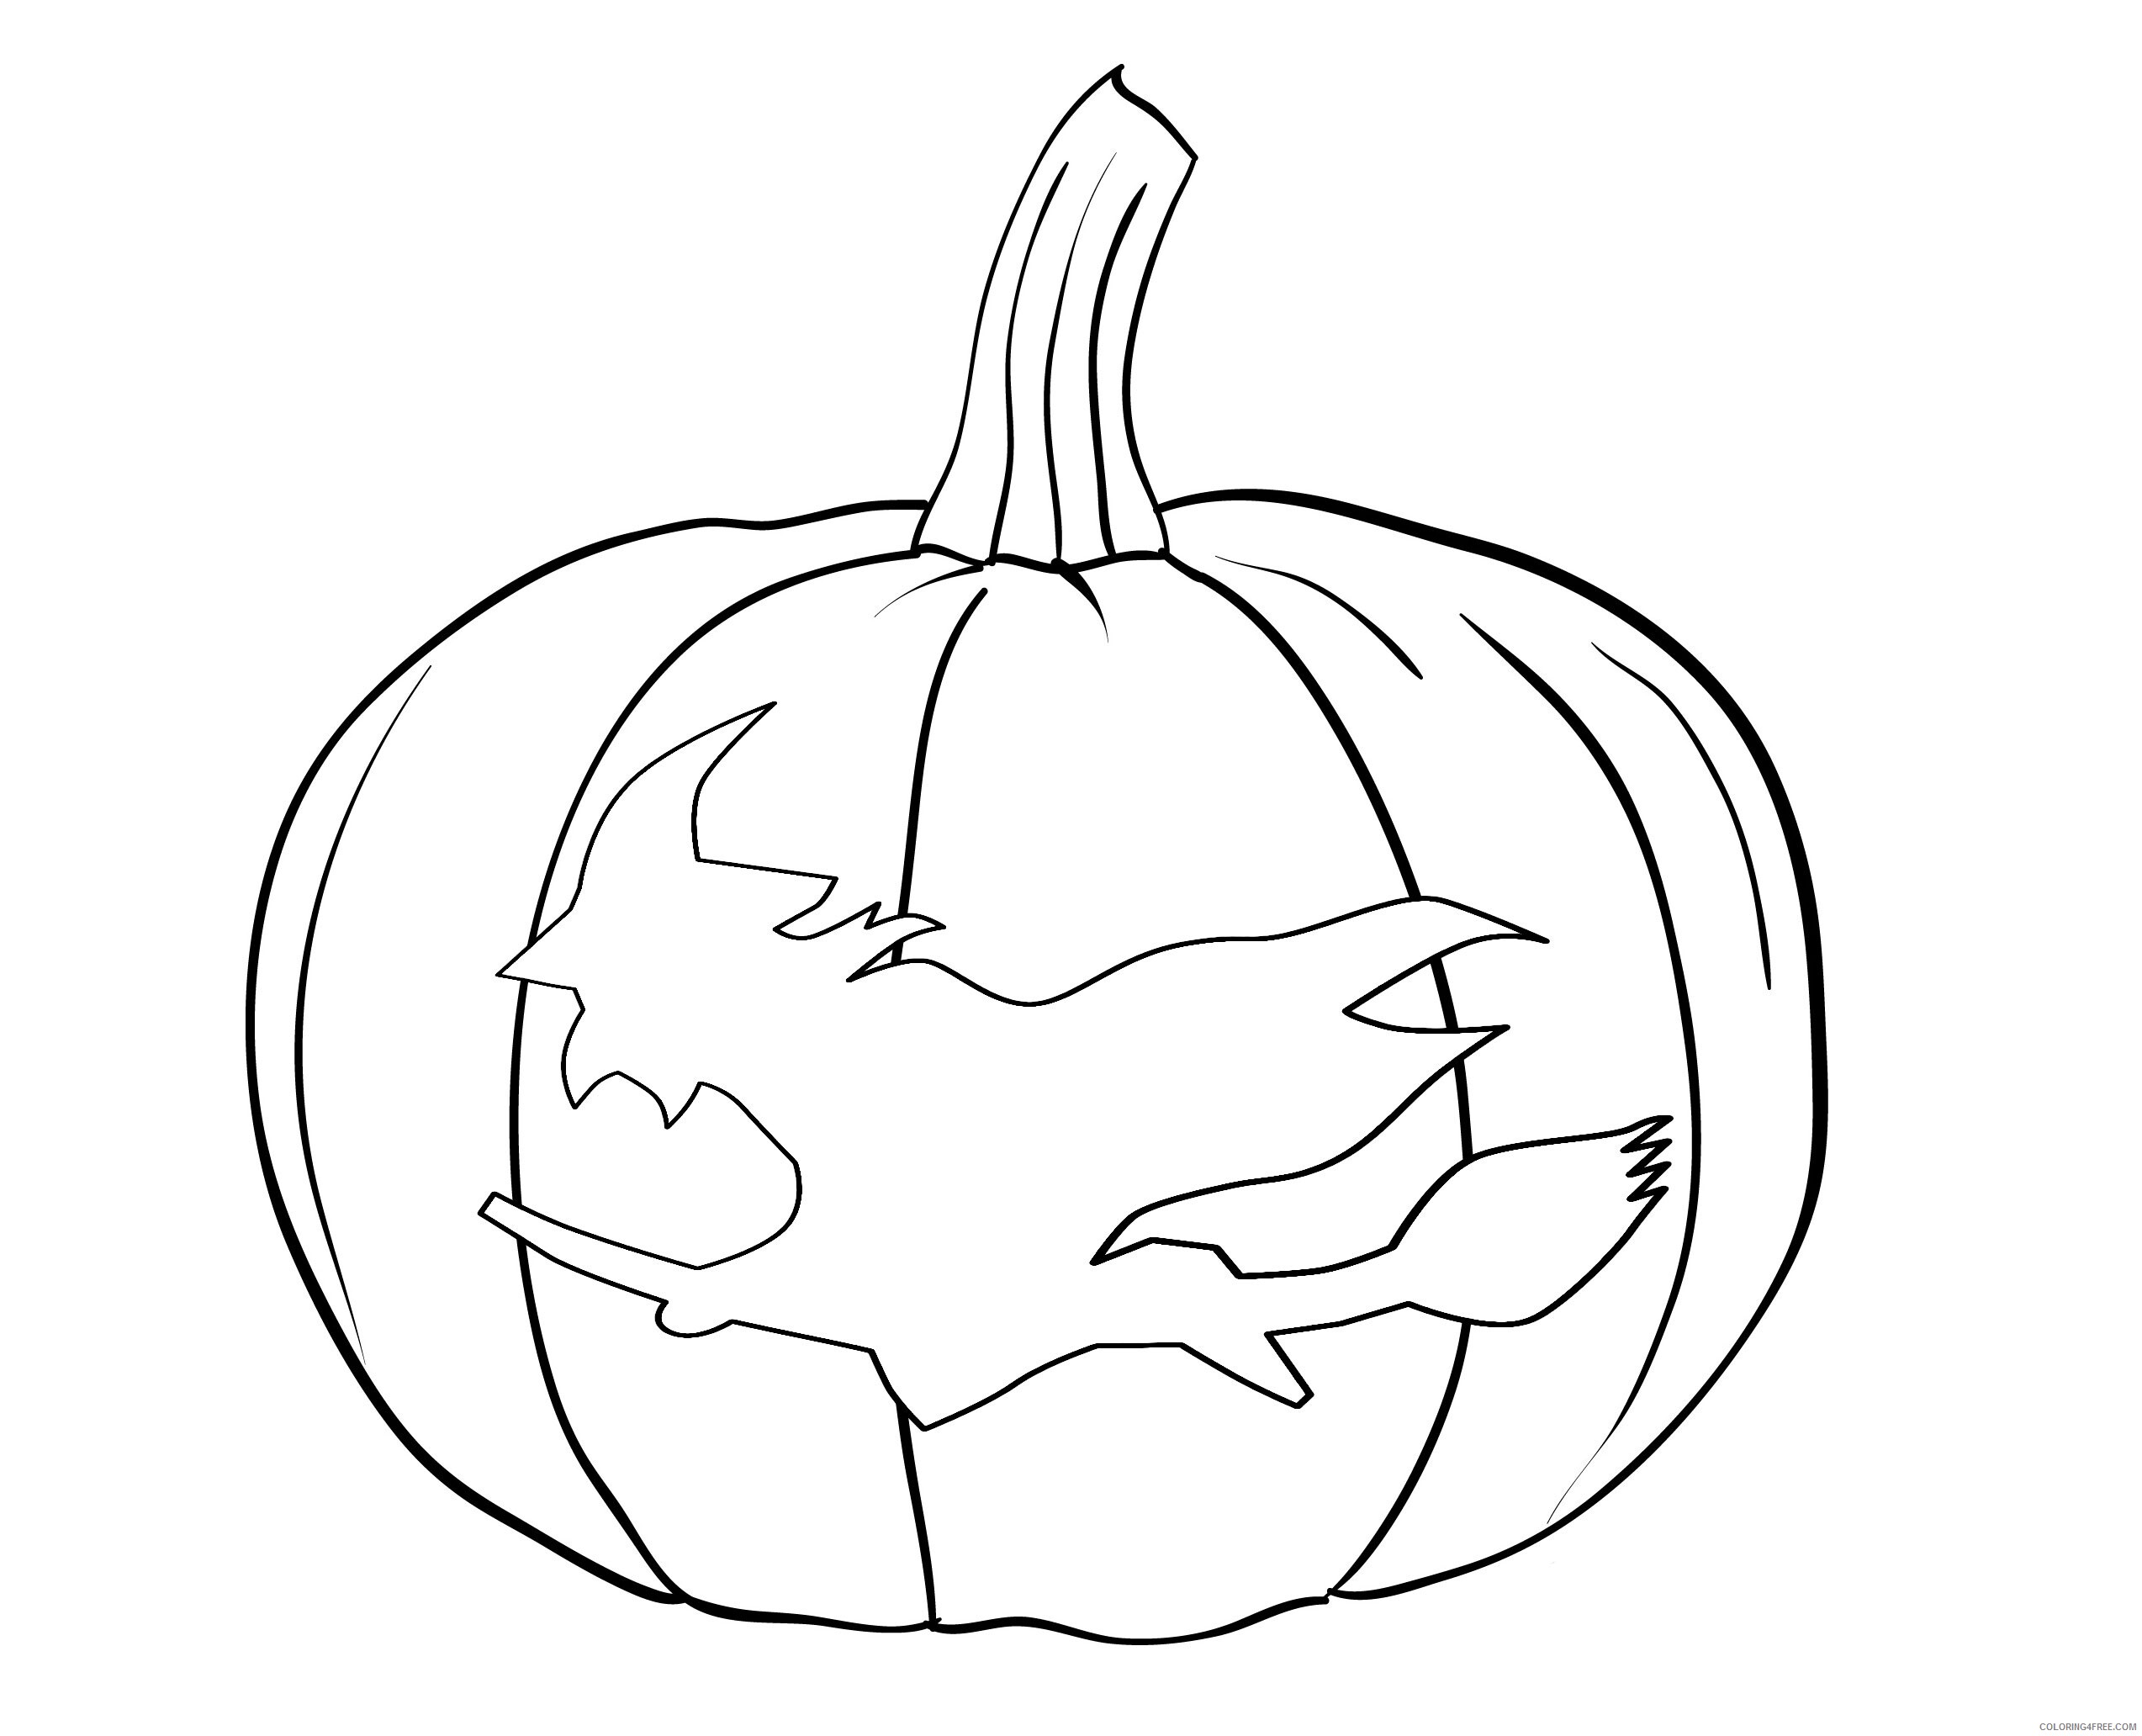 Pumpkin Coloring Pages Vegetables Food Halloween Carved with a Witch 2021 Coloring4free